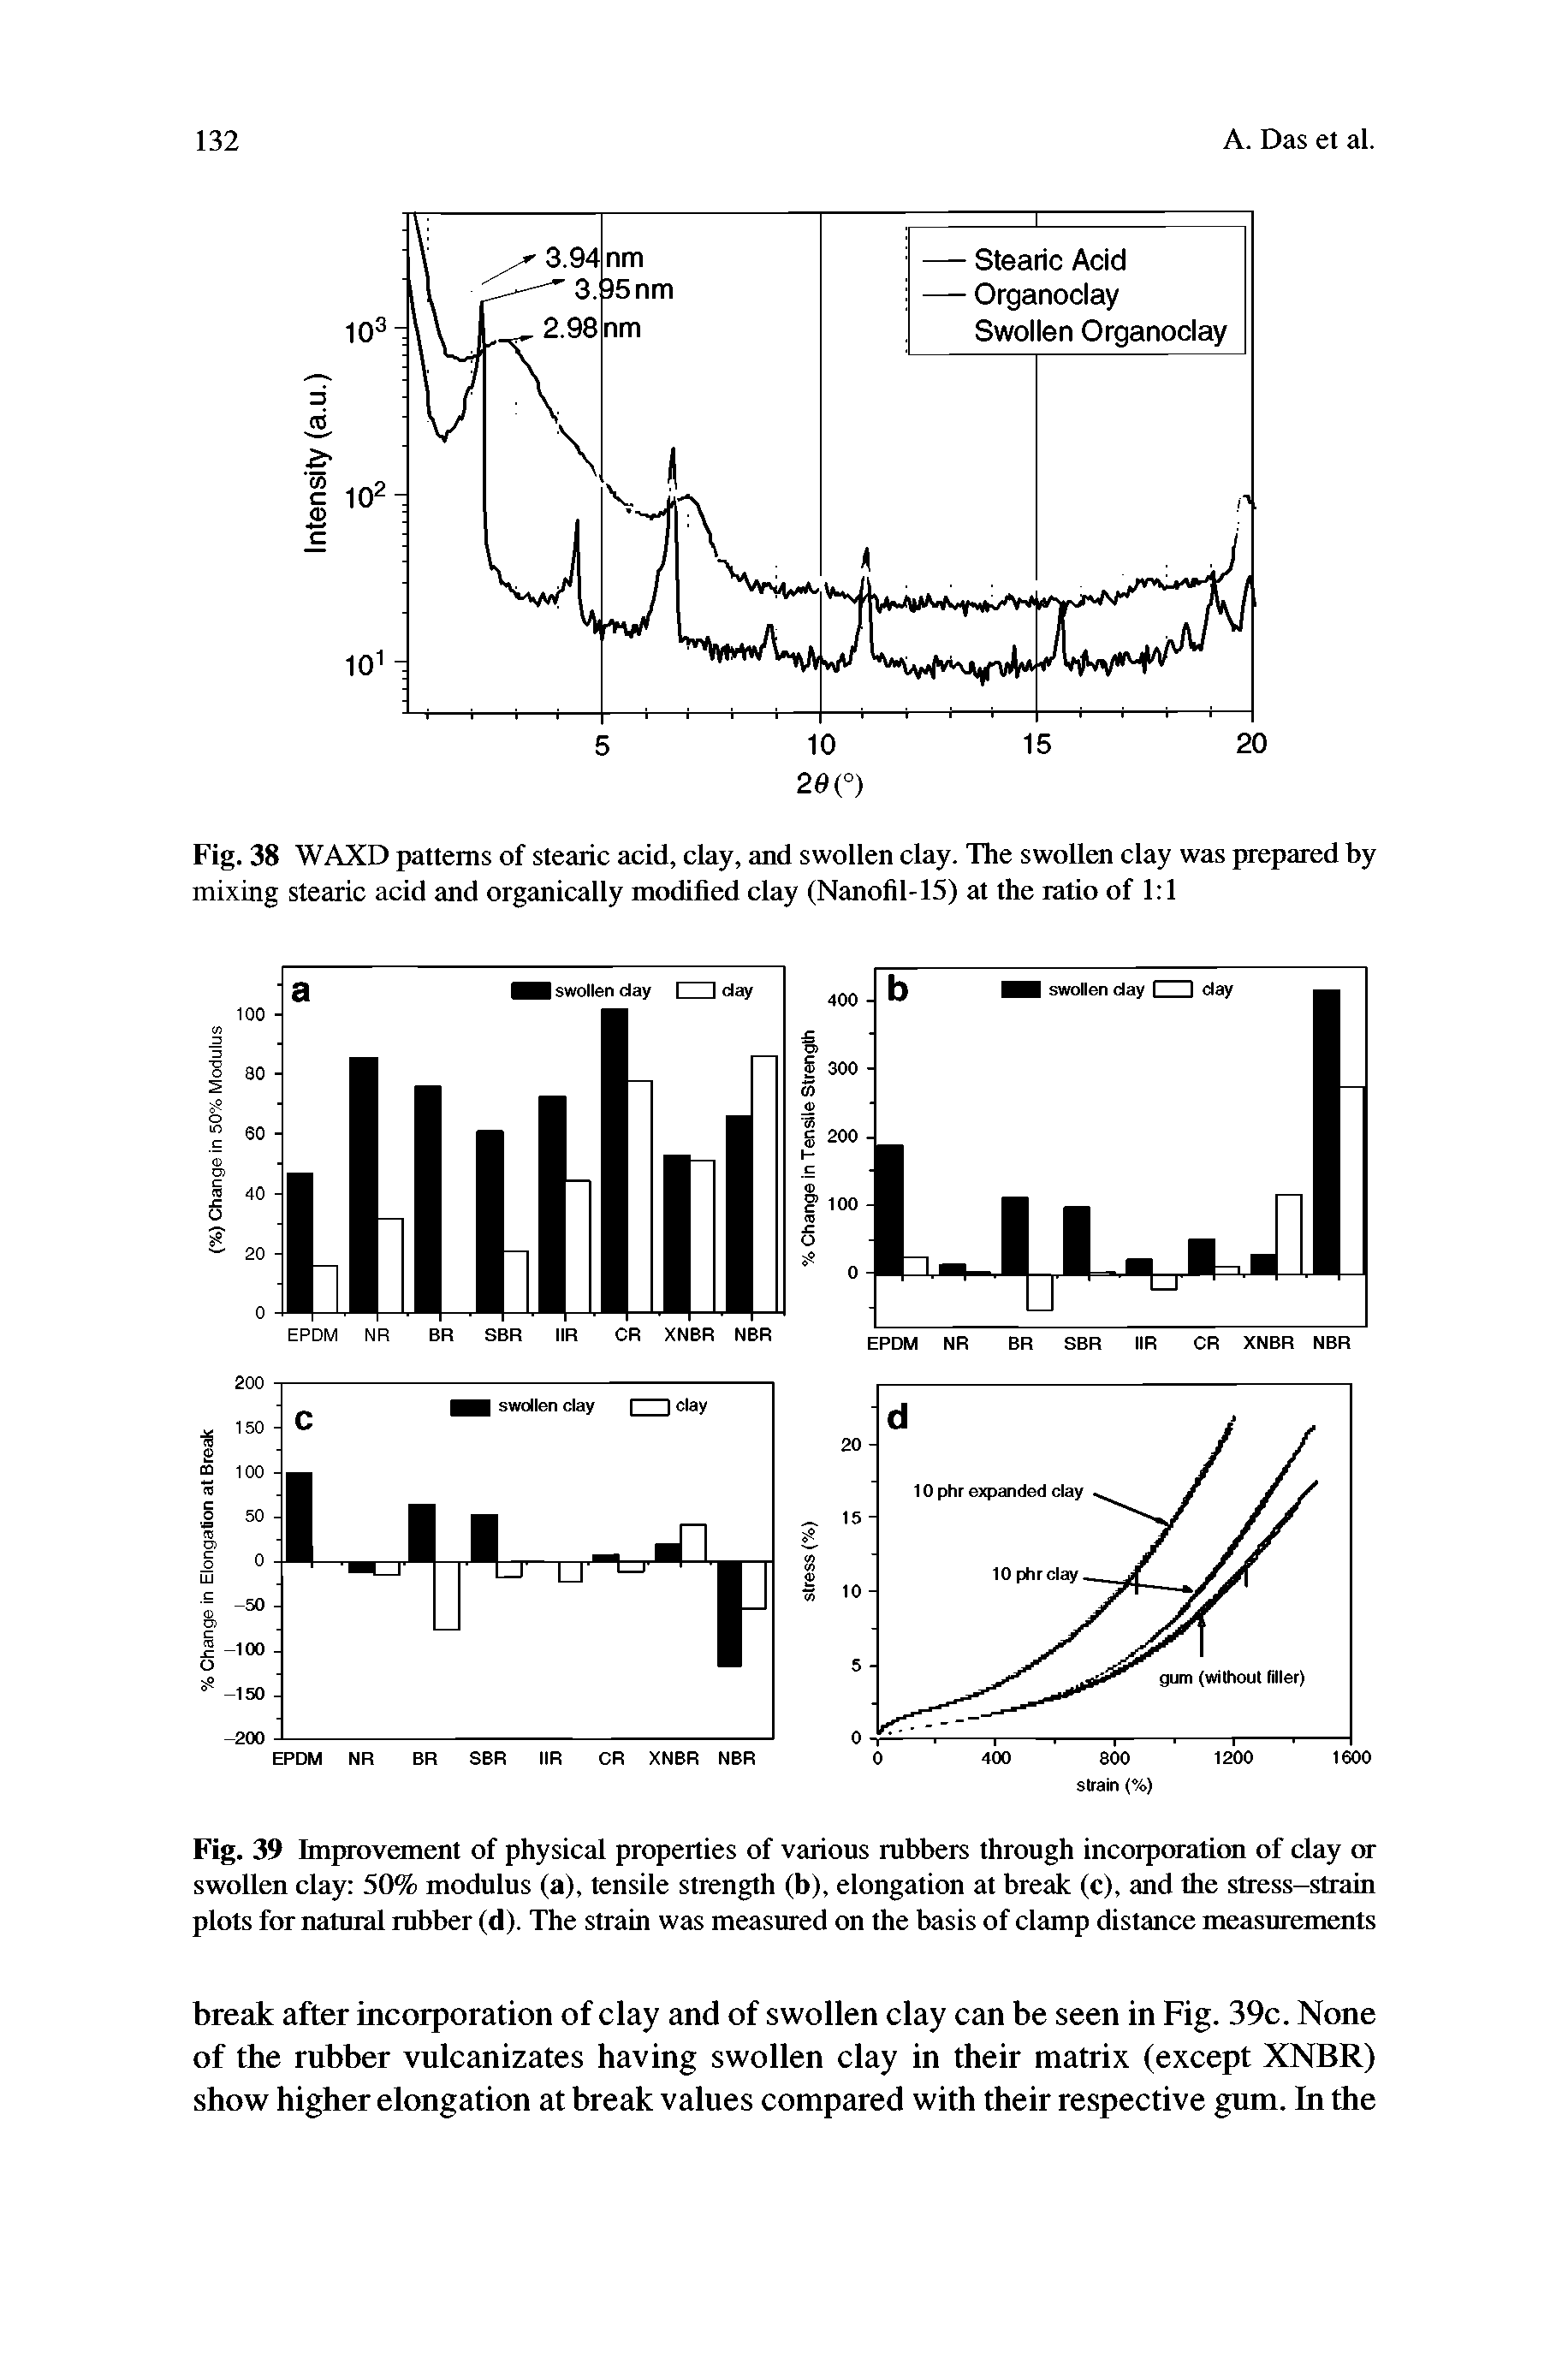 Fig. 39 Improvement of physical properties of various rubbers through incorporation of clay or swollen clay 50% modulus (a), tensile strength (b), elongation at break (c), and the stress-strain plots for natural rubber (d). The strain was measured on the basis of clamp distance measurements...